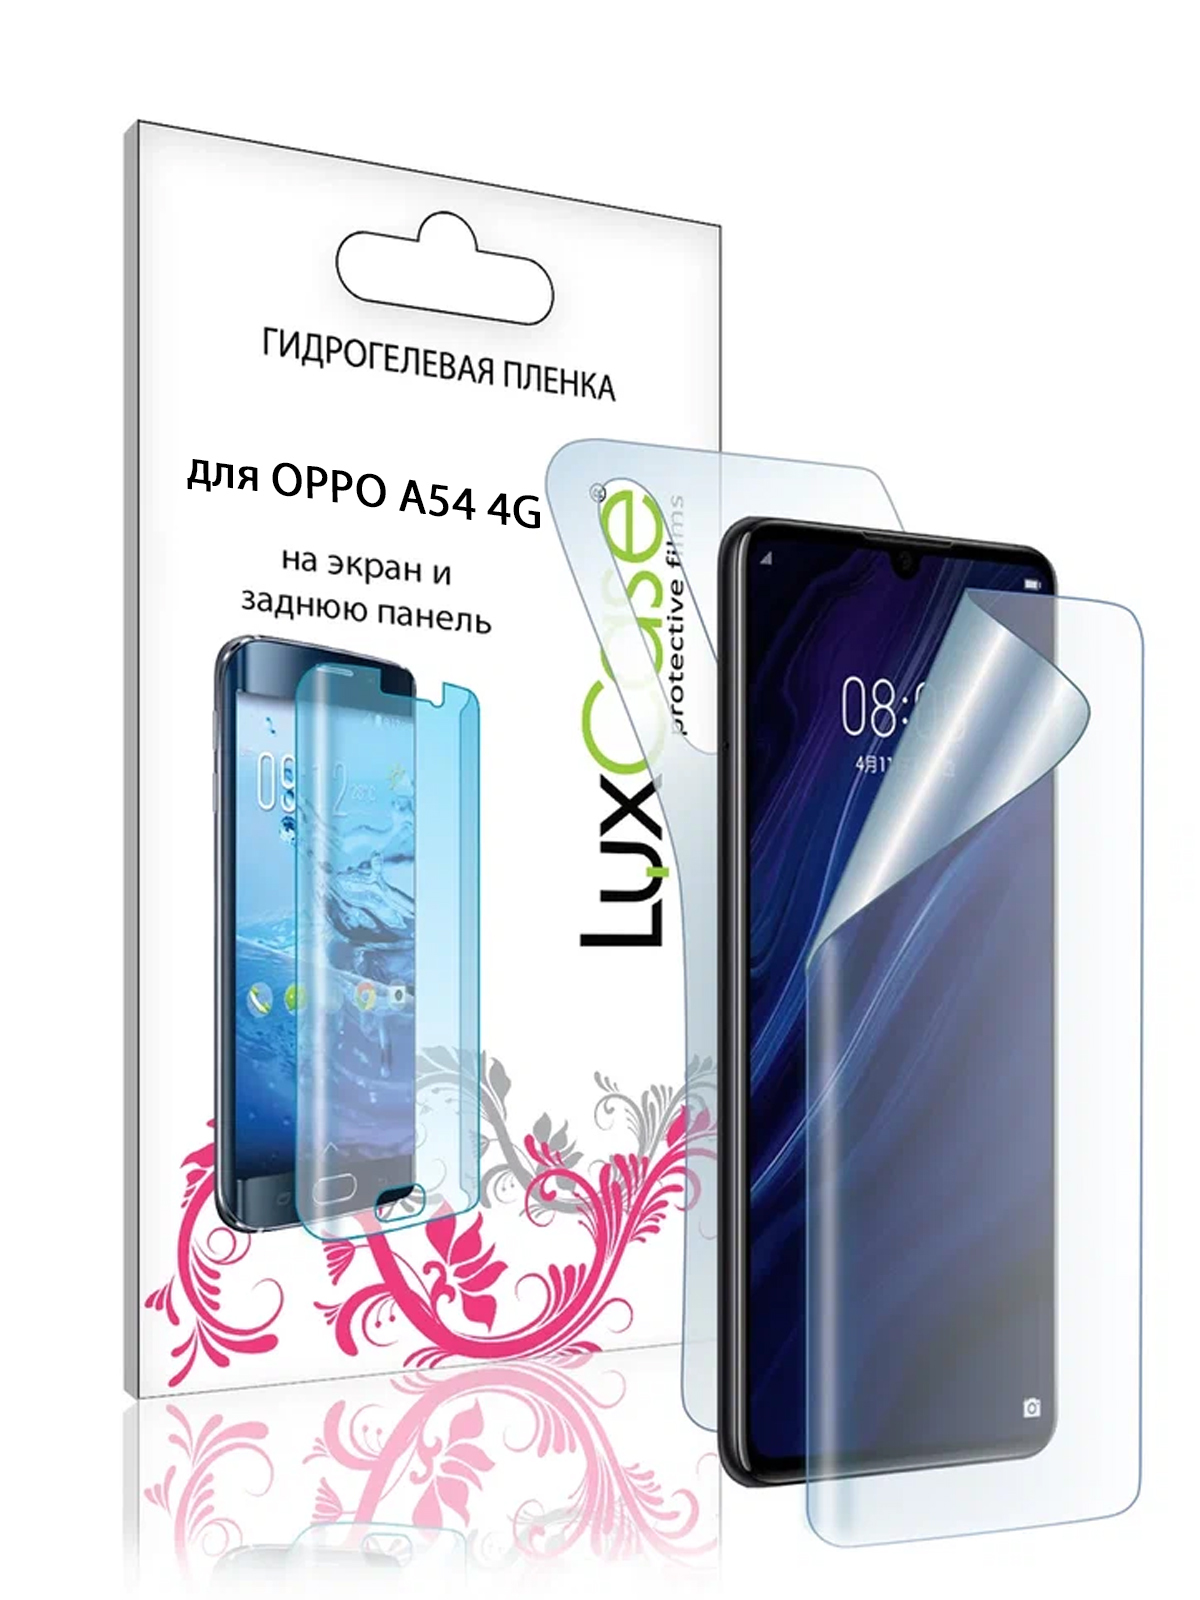 Пленка гидрогелевая LuxCase для Oppo A54 Front and Back Transparent 86397 гидрогелевая пленка luxcase для tcl 305 0 14mm transparent front and back 90593